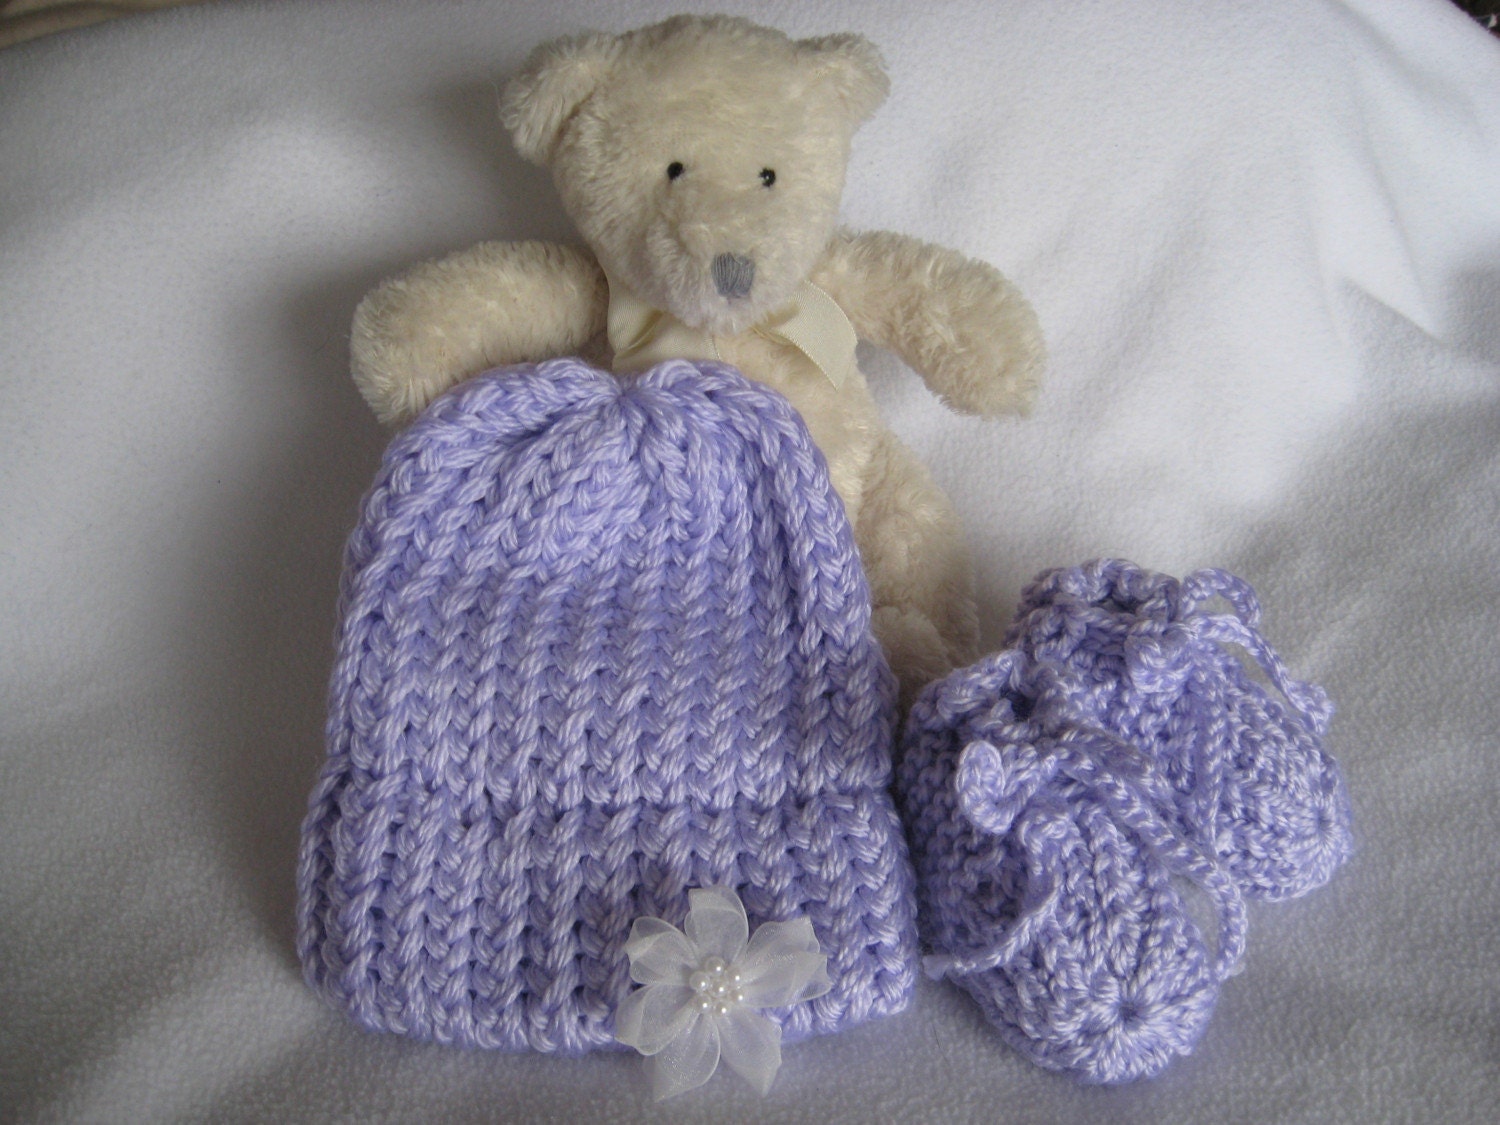 Baby Gift Set - Knitted Lavendar Booties and Cuffed Hat with Flower Ribbon